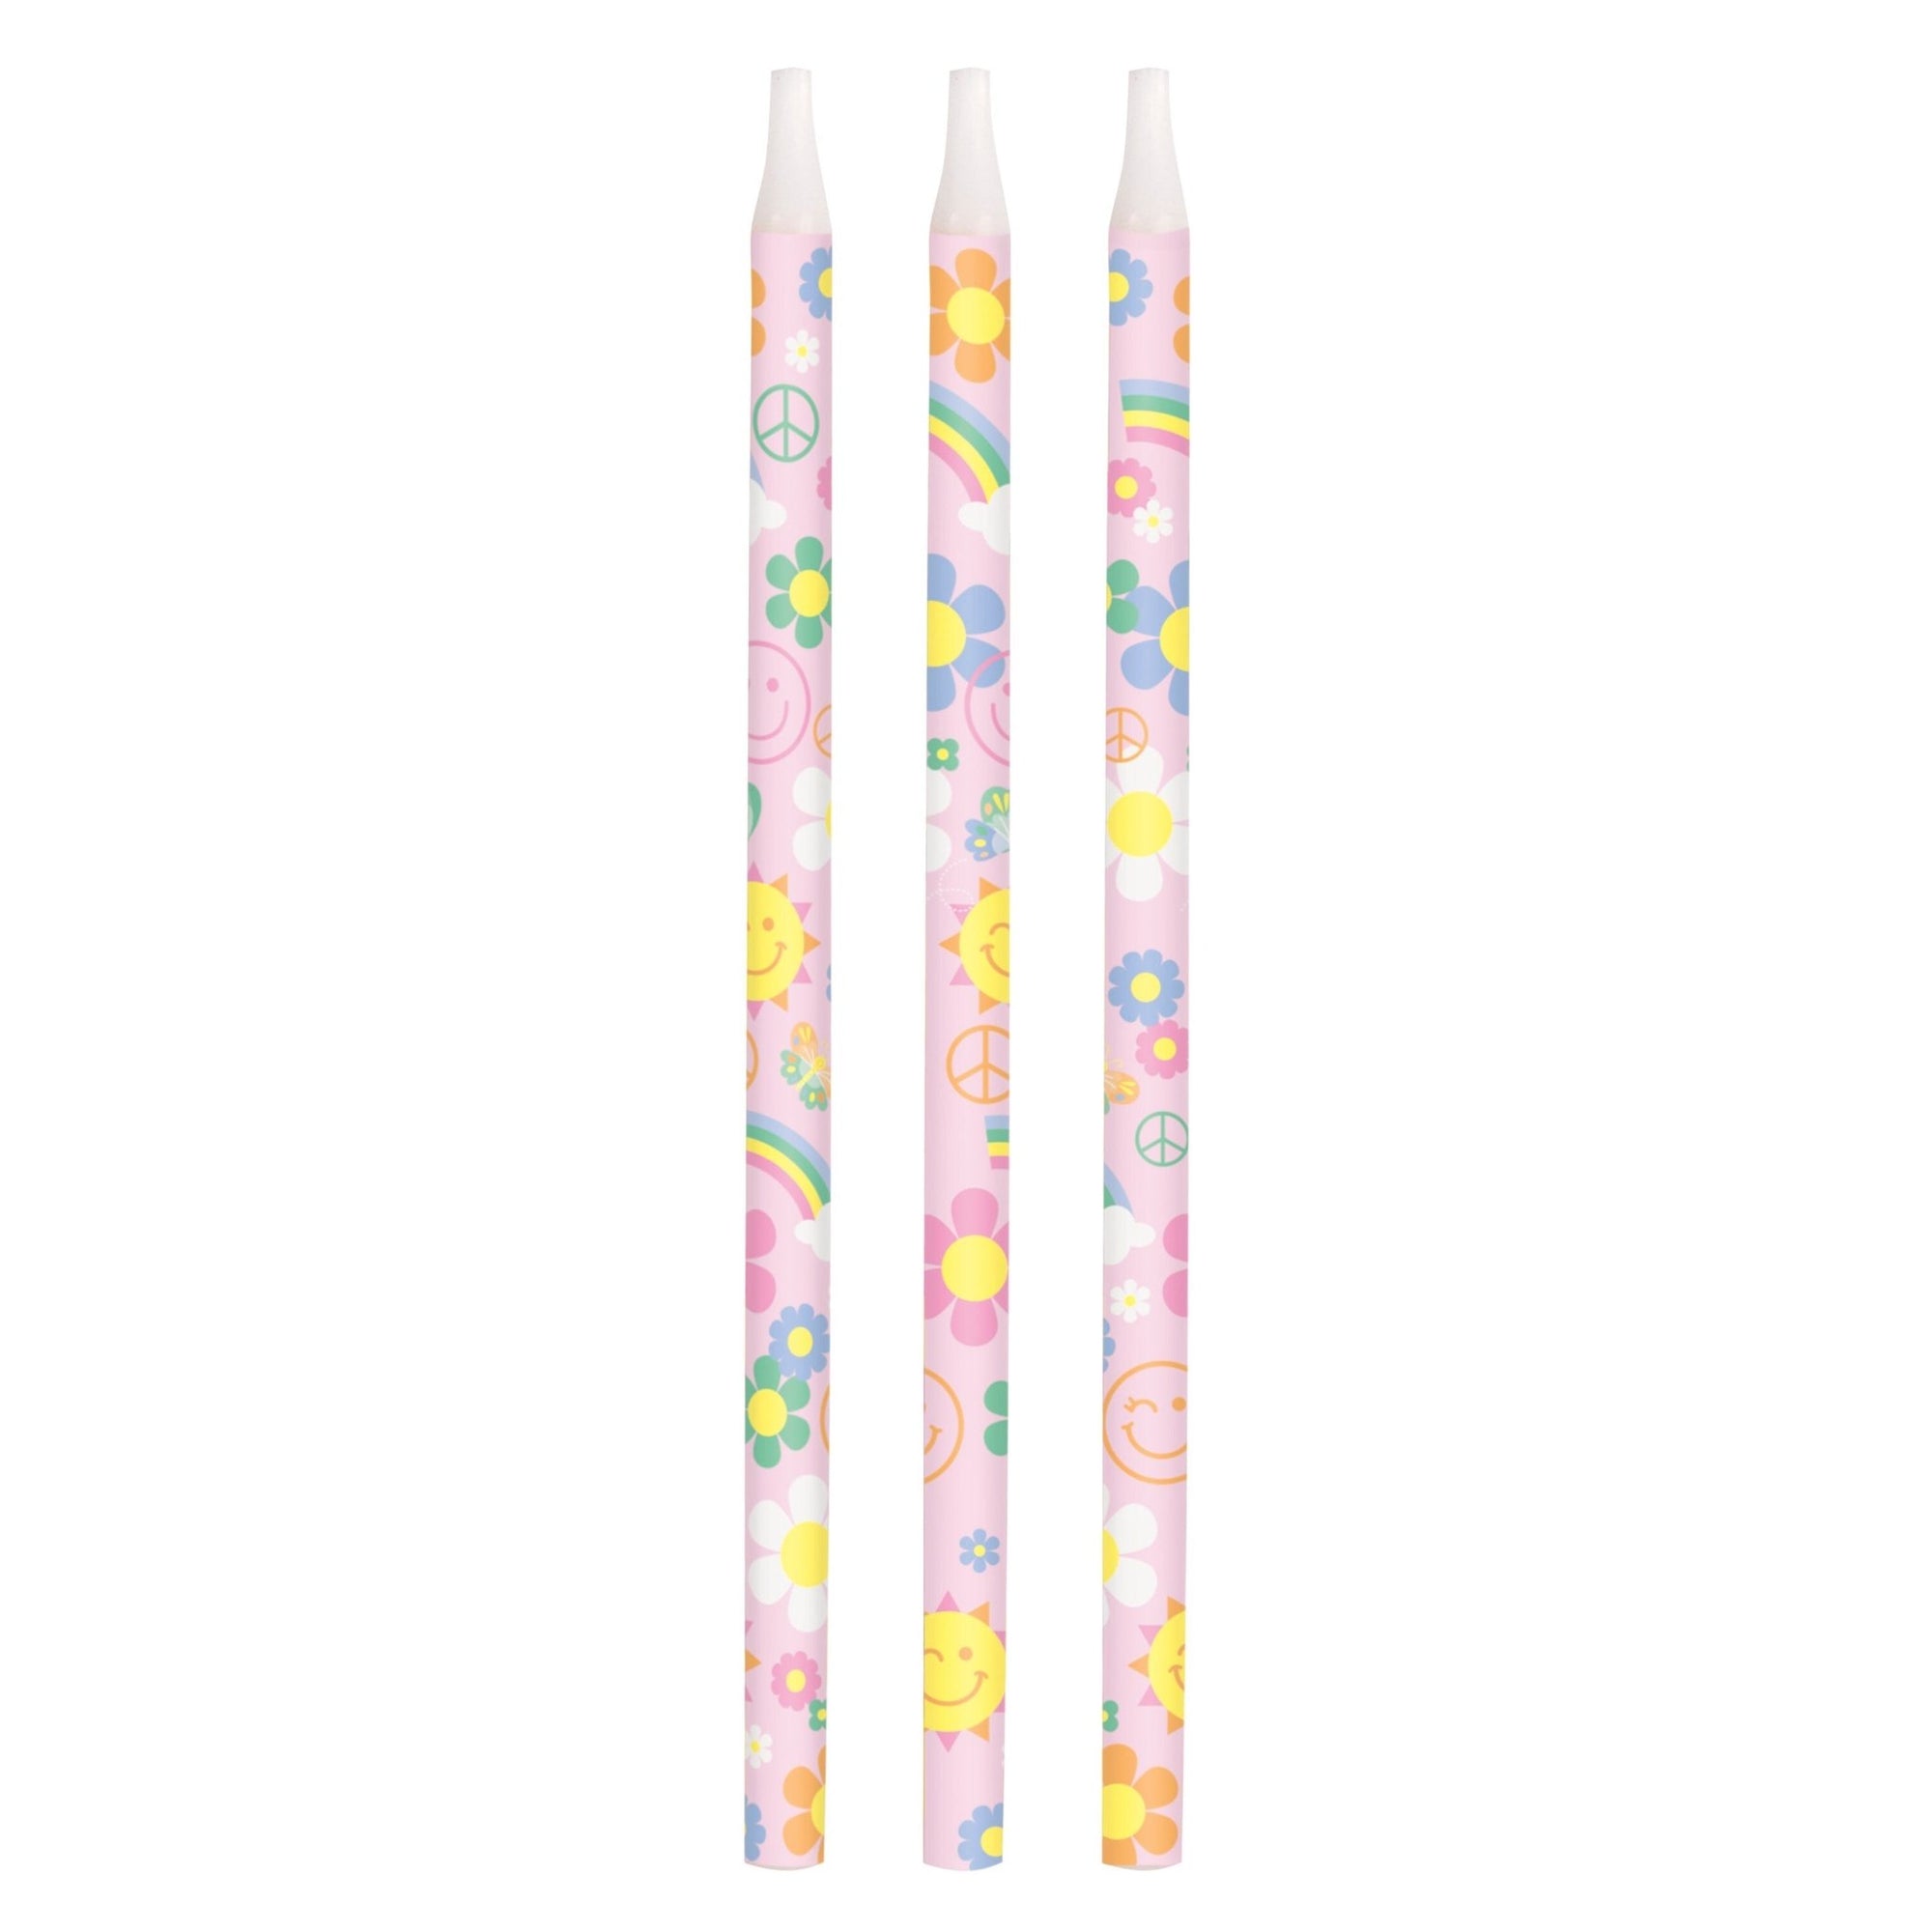 Groovy Party Pink Floral Candles - Stesha Party